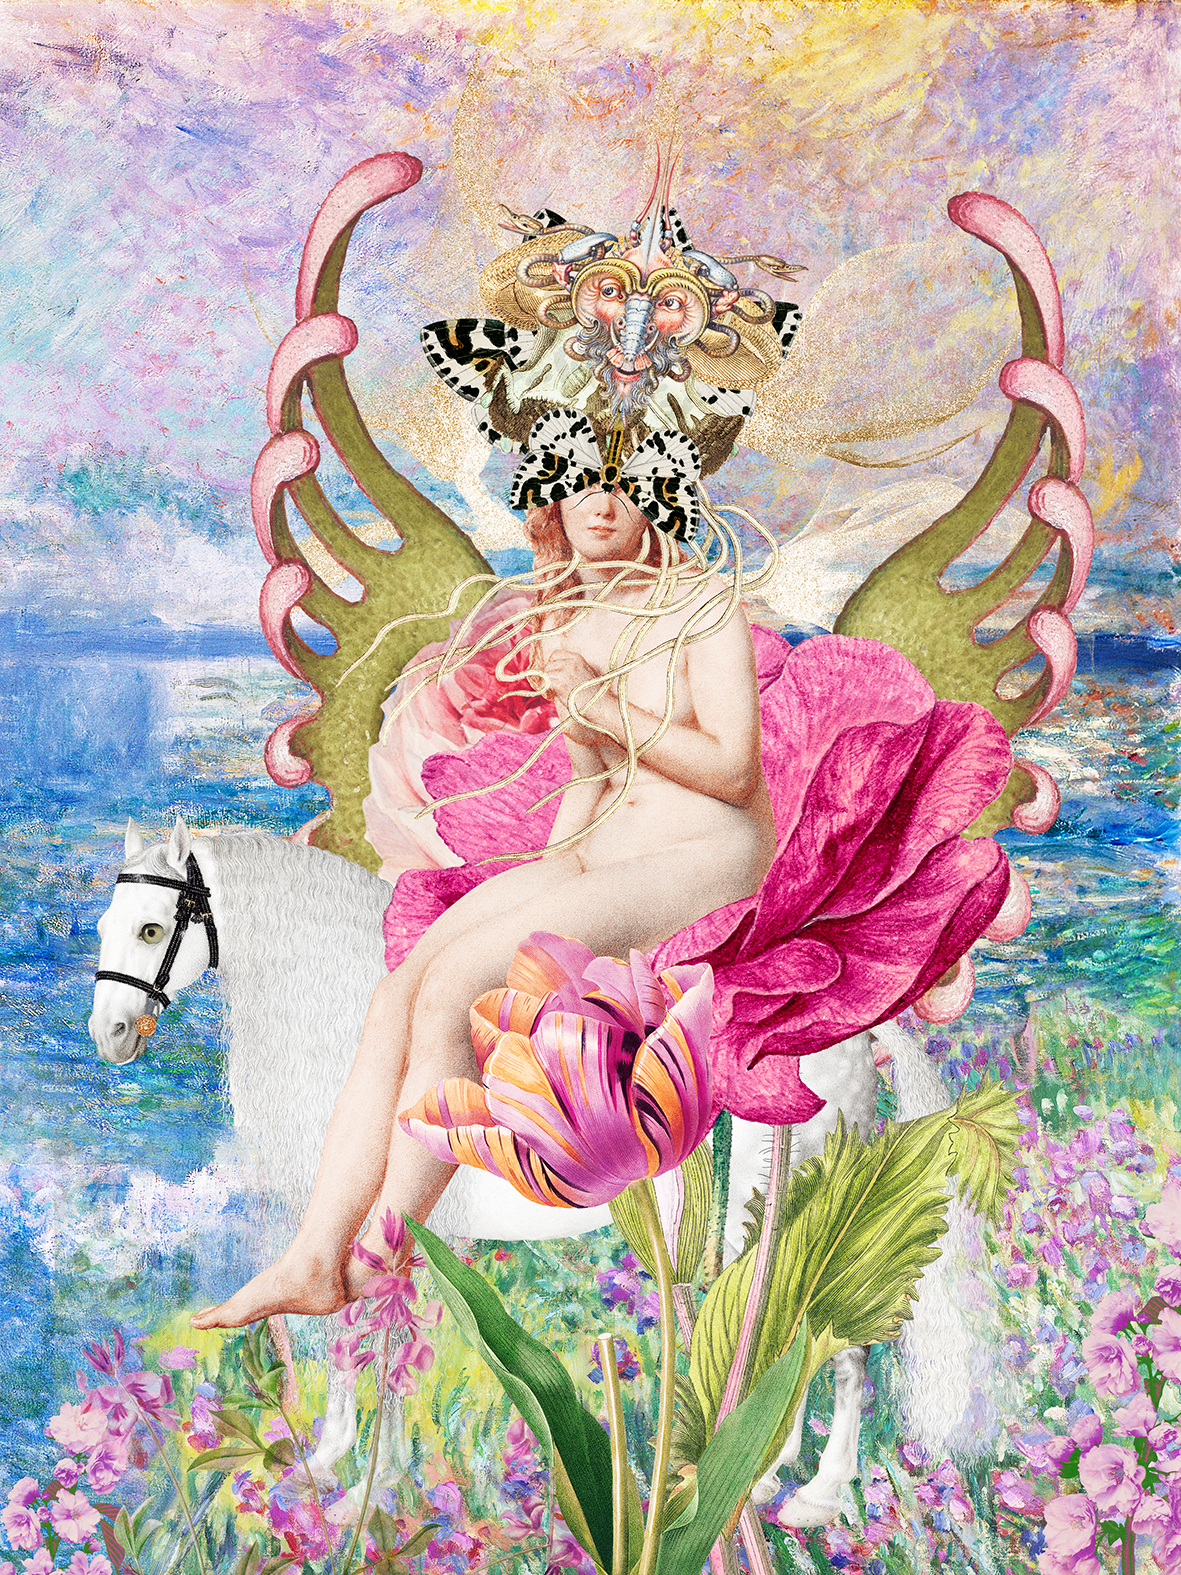 Under The Pink Sky. Limited Edition Digital Collage Print On Canvas